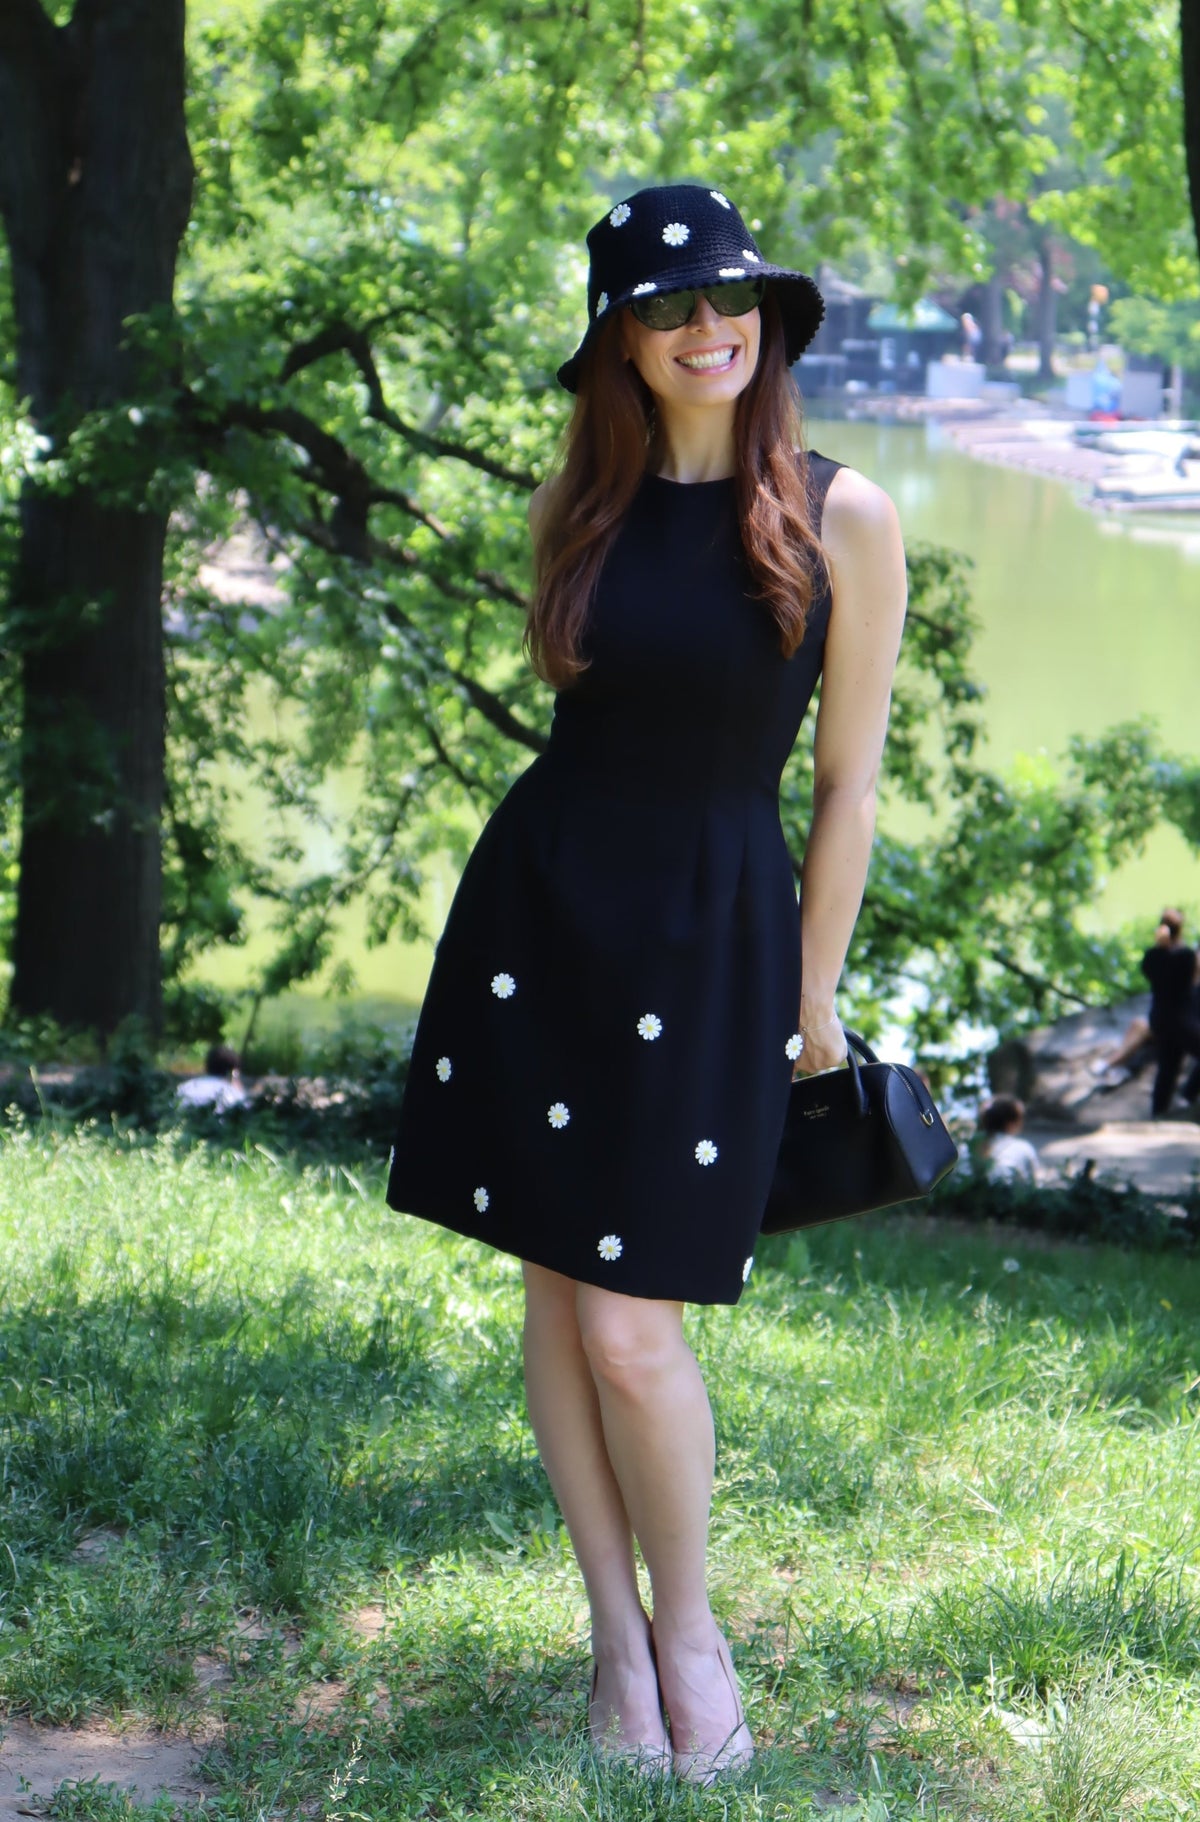 Model in a black dress with white daisy appliques standing in front of a tree and a lake.